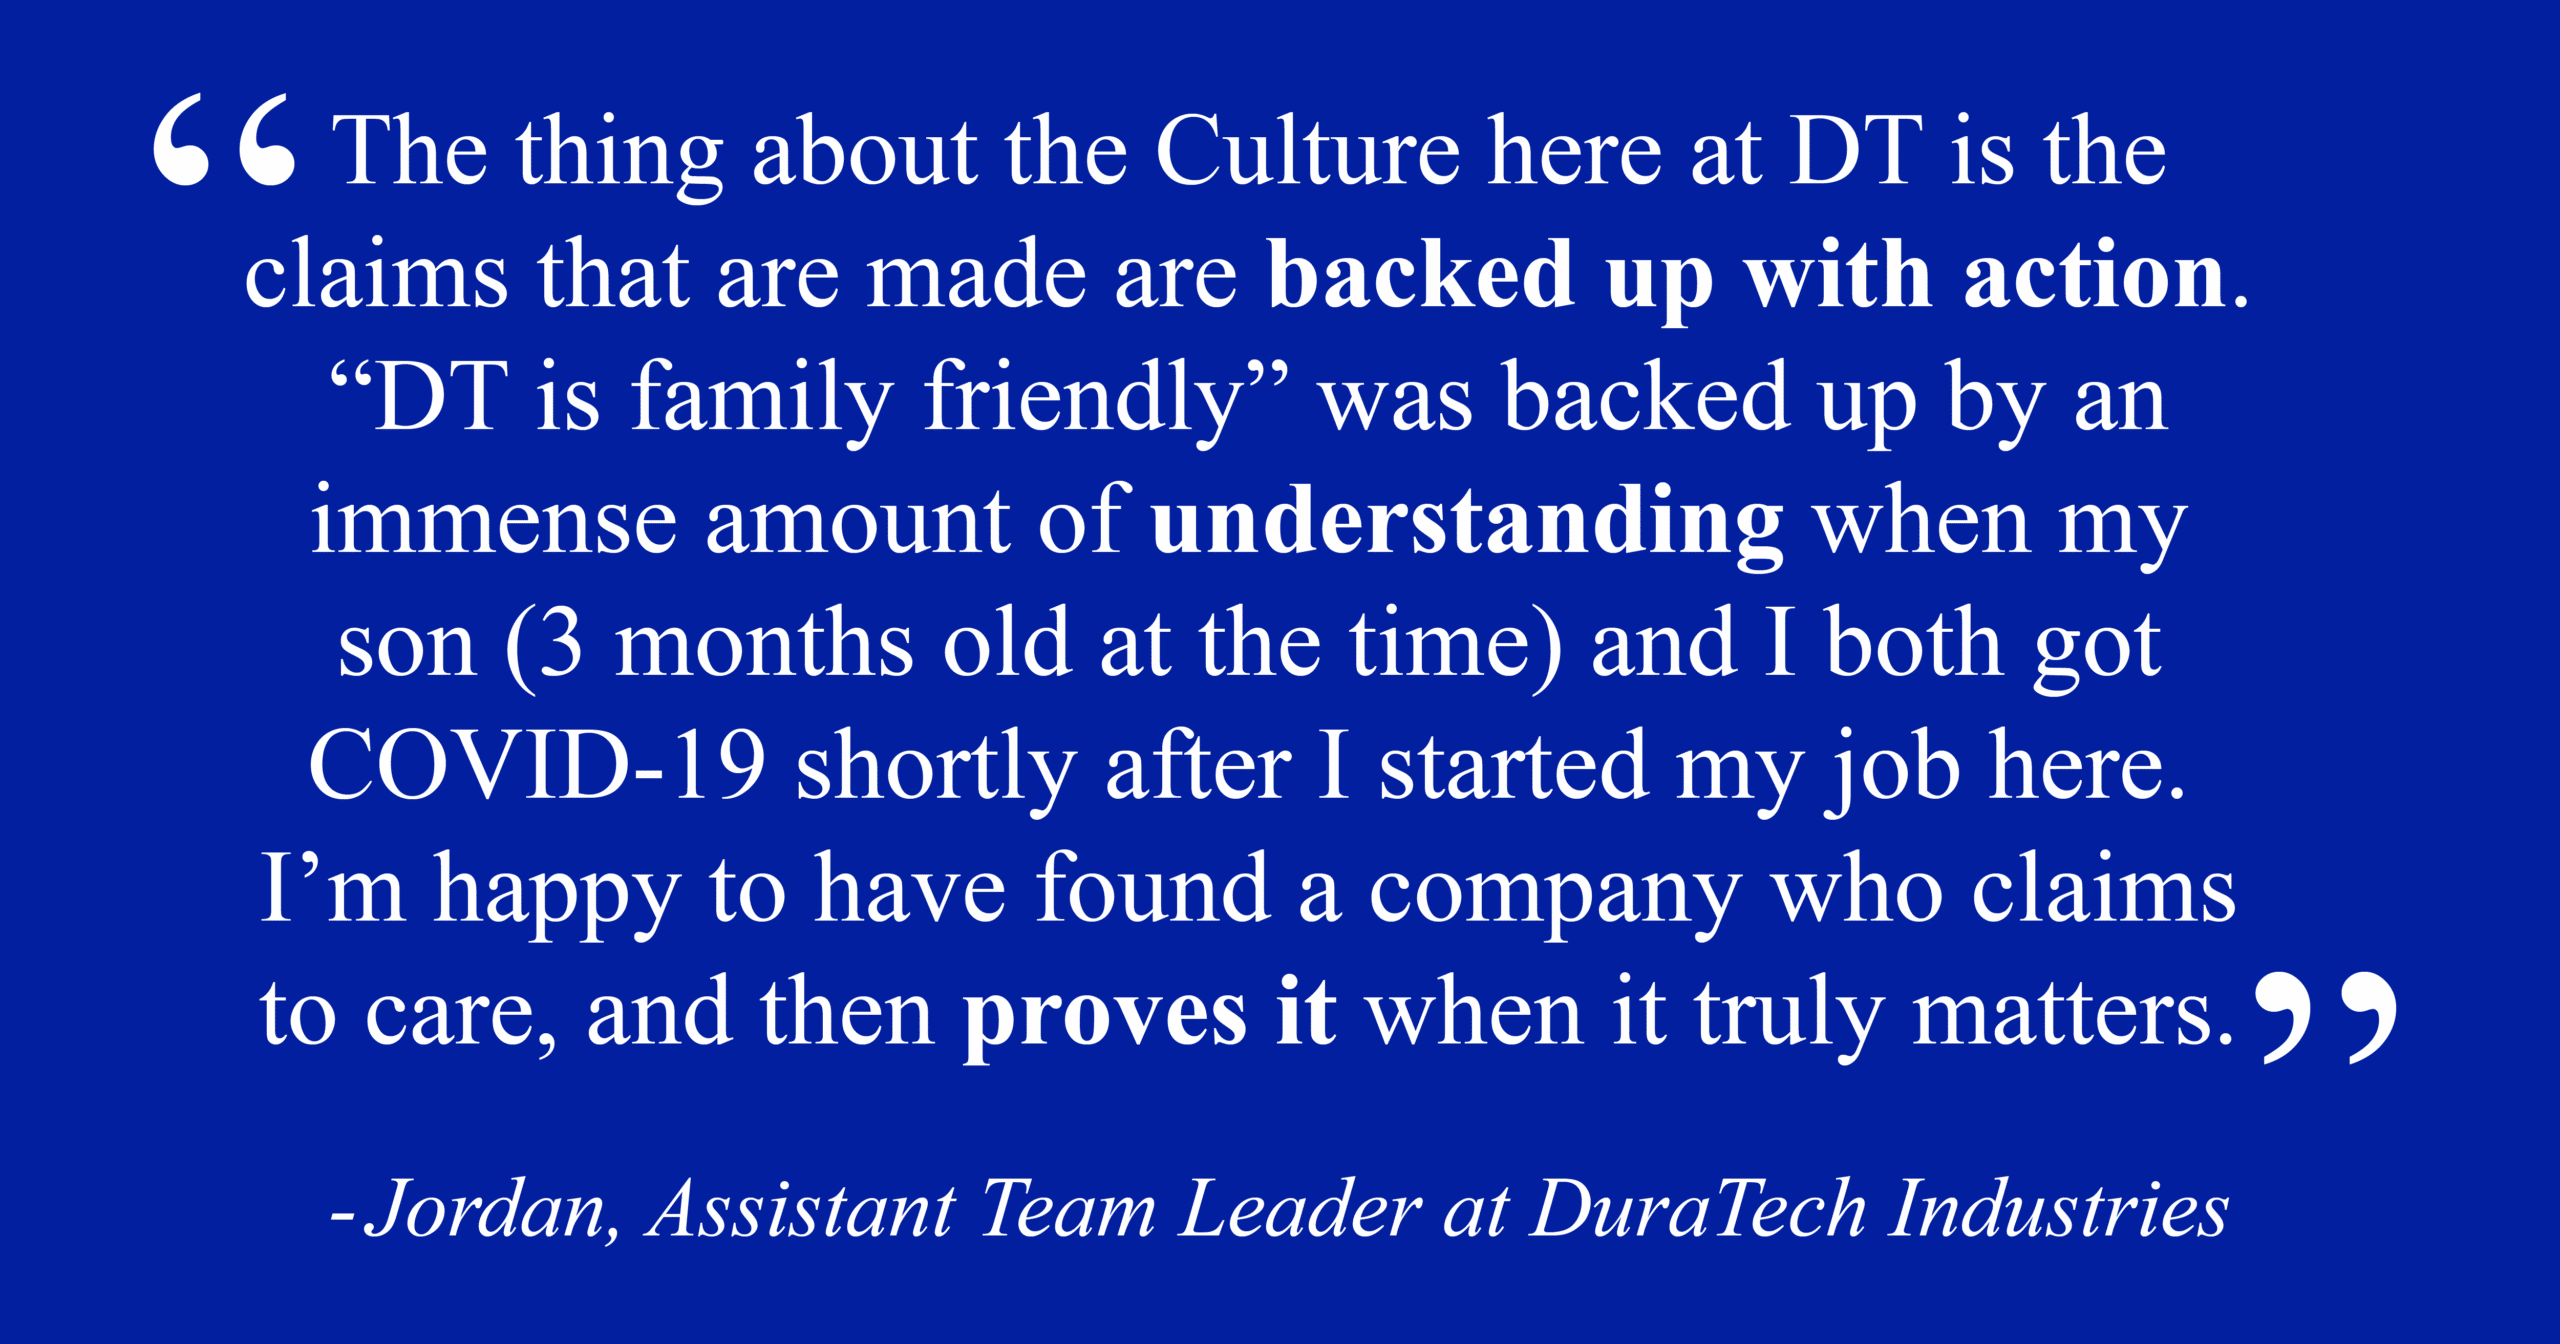 Jordan, Assistant Team Leader at DuraTech Industries "The thing about the Culture here at DT is the claims that are backed up with action. 'DT is family friendly' was backed up by an immense amount of understanding when my son (3 months old at the time) and I both got COVID-19 shortly after I started my job here. I'm happy to have found a company who claims to care, and then proves it when it truly matters."